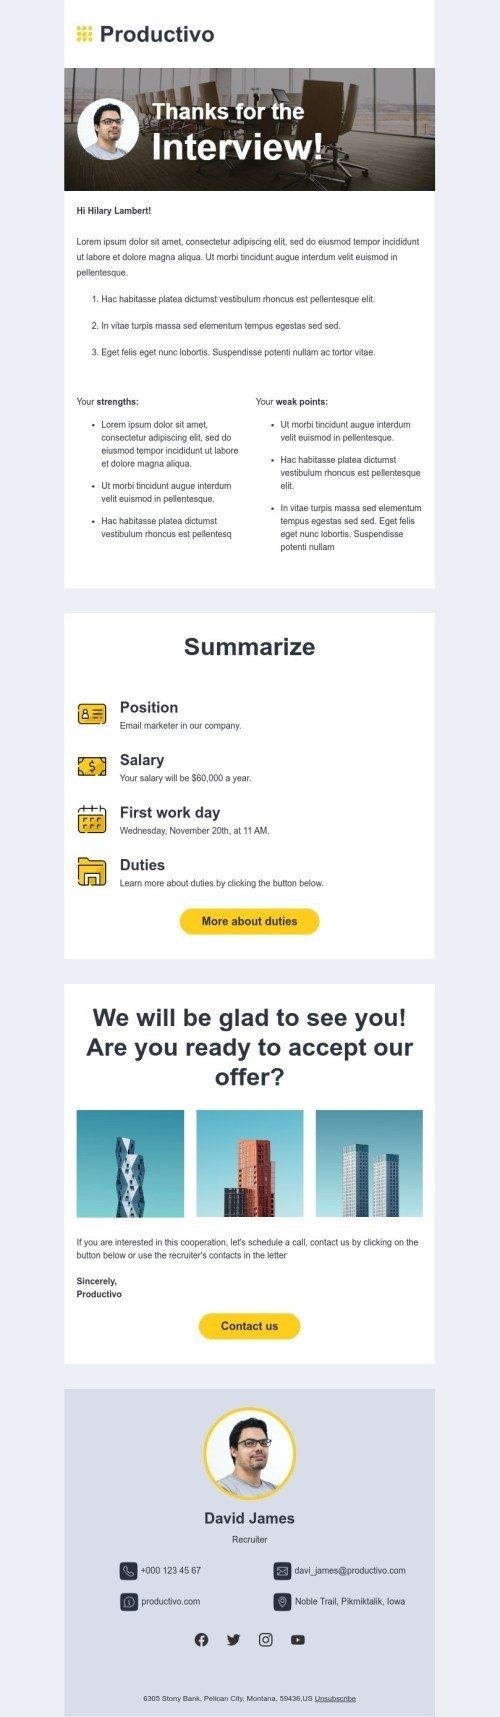 Promo email template "We will be glad to see you" for business industry mobile view